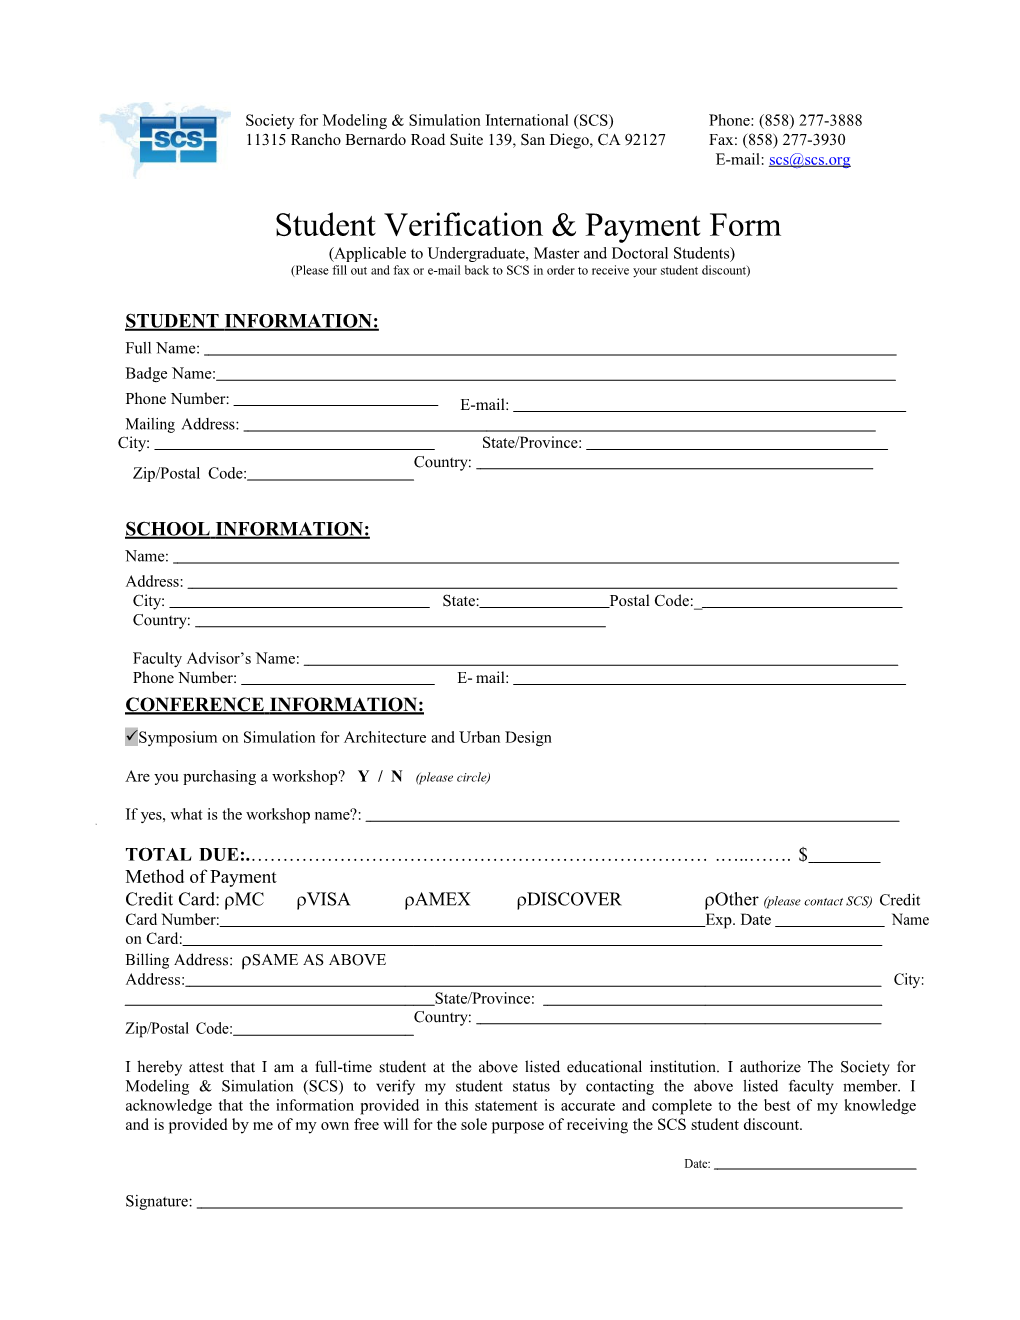 Please Fill Outand Fax Ore-Mail Back to Scsin Order to Receiveyourstudentdiscount